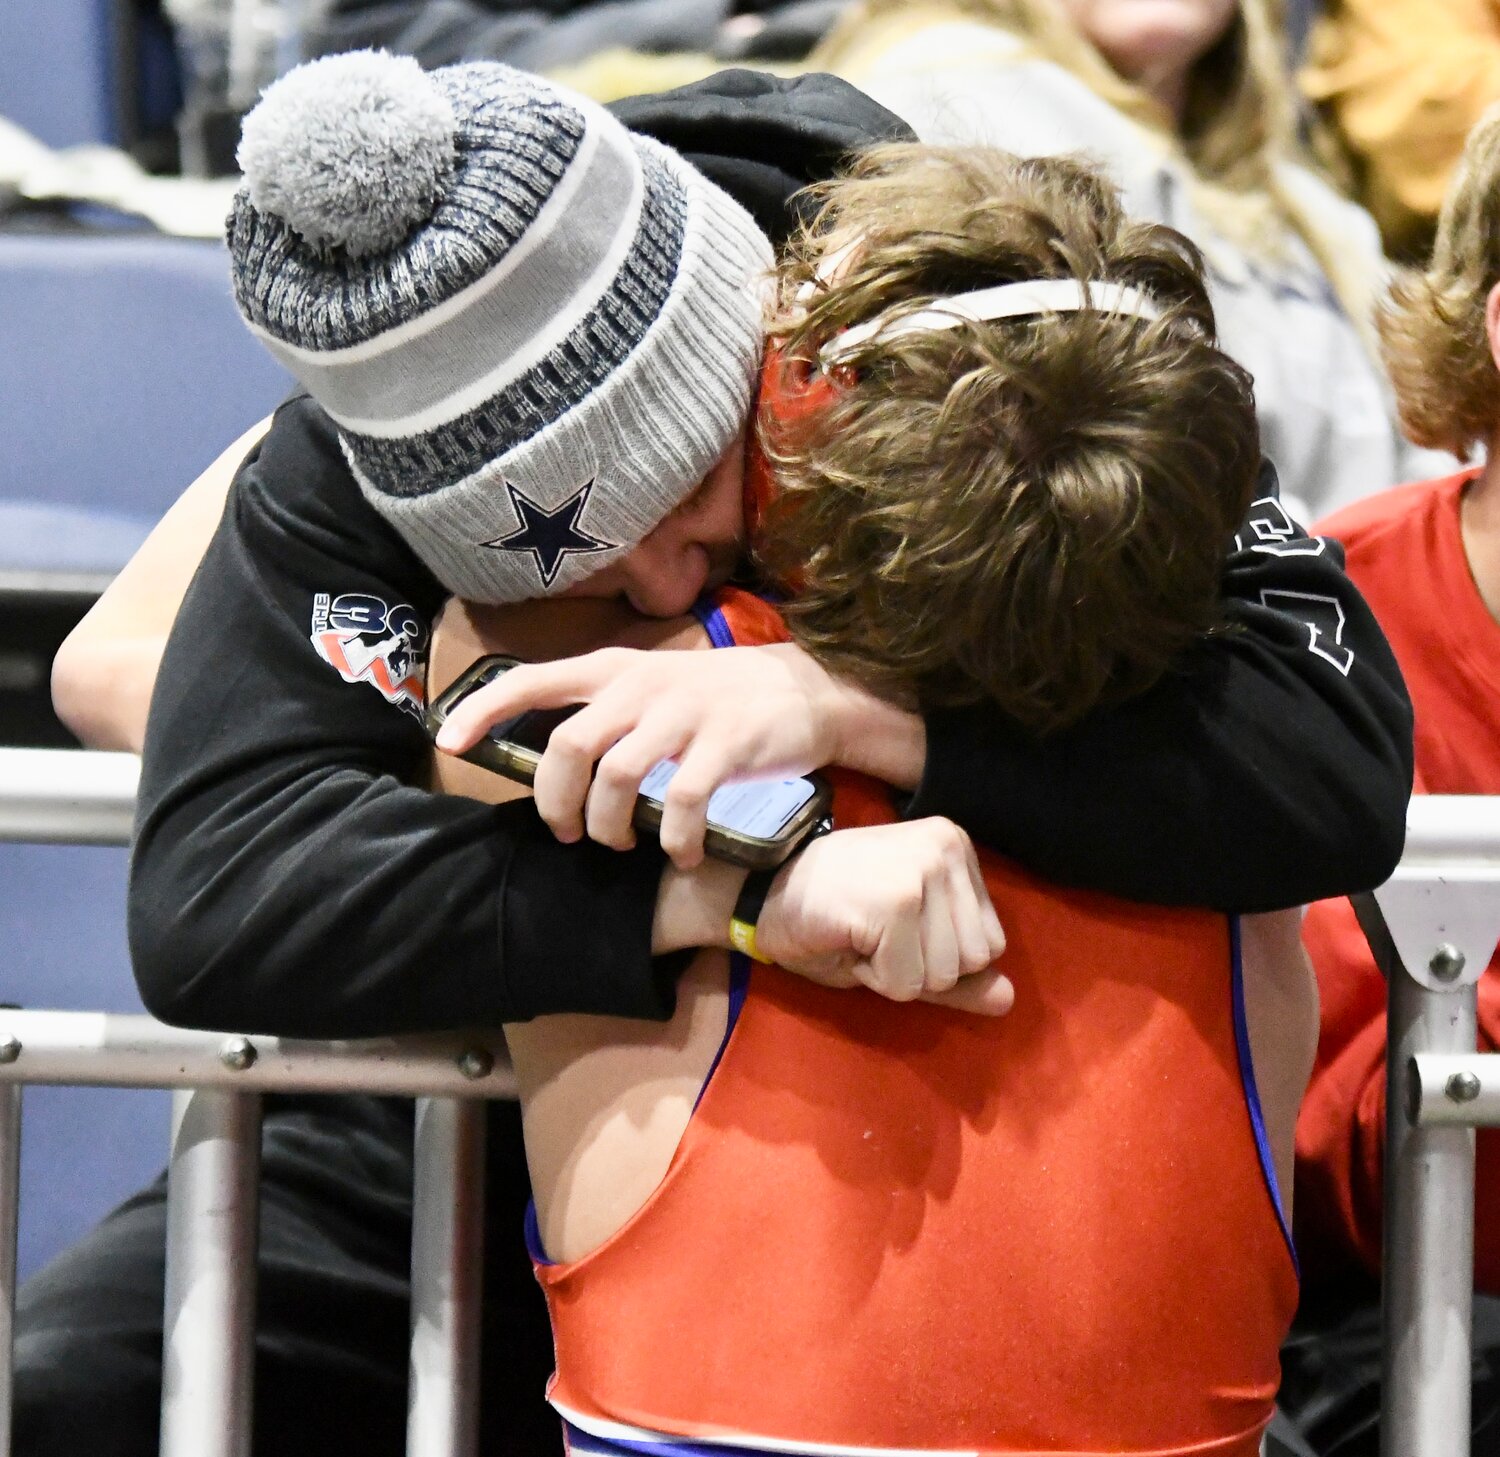 Newly-crowned 175-pound State Champion Brady Roberts goes into the stands to hug his younger brother Bridger, following his 3-0 victory over Buffalo’s Hazen Camino.